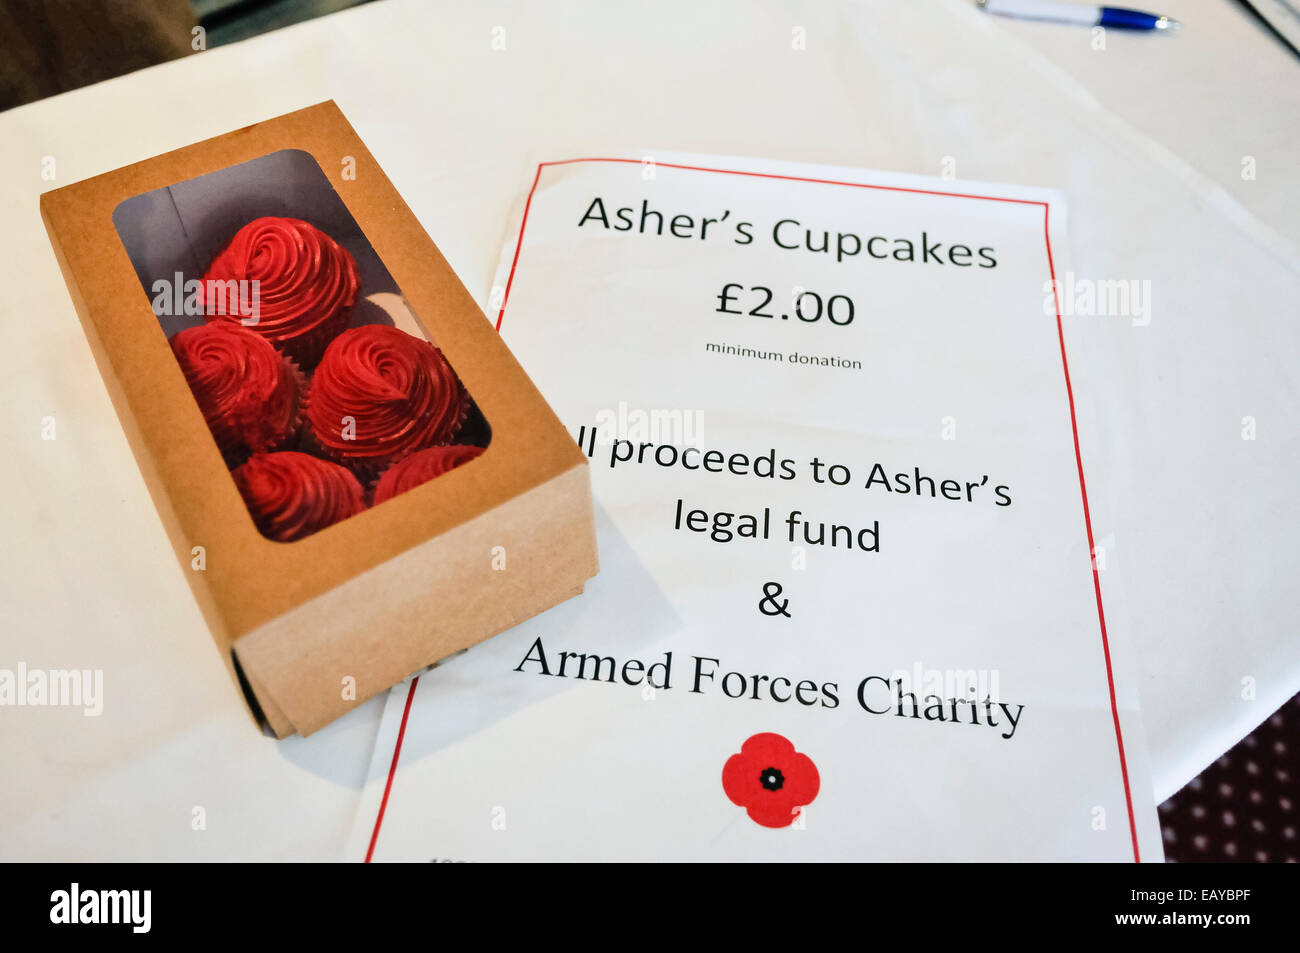 Belfast, Northern Ireland. 22nd Nov 2014. - Cupcakes from Asher's Bakery on sale to raise funds for the Armed Forces Charity Credit:  Stephen Barnes/Alamy Live News Stock Photo